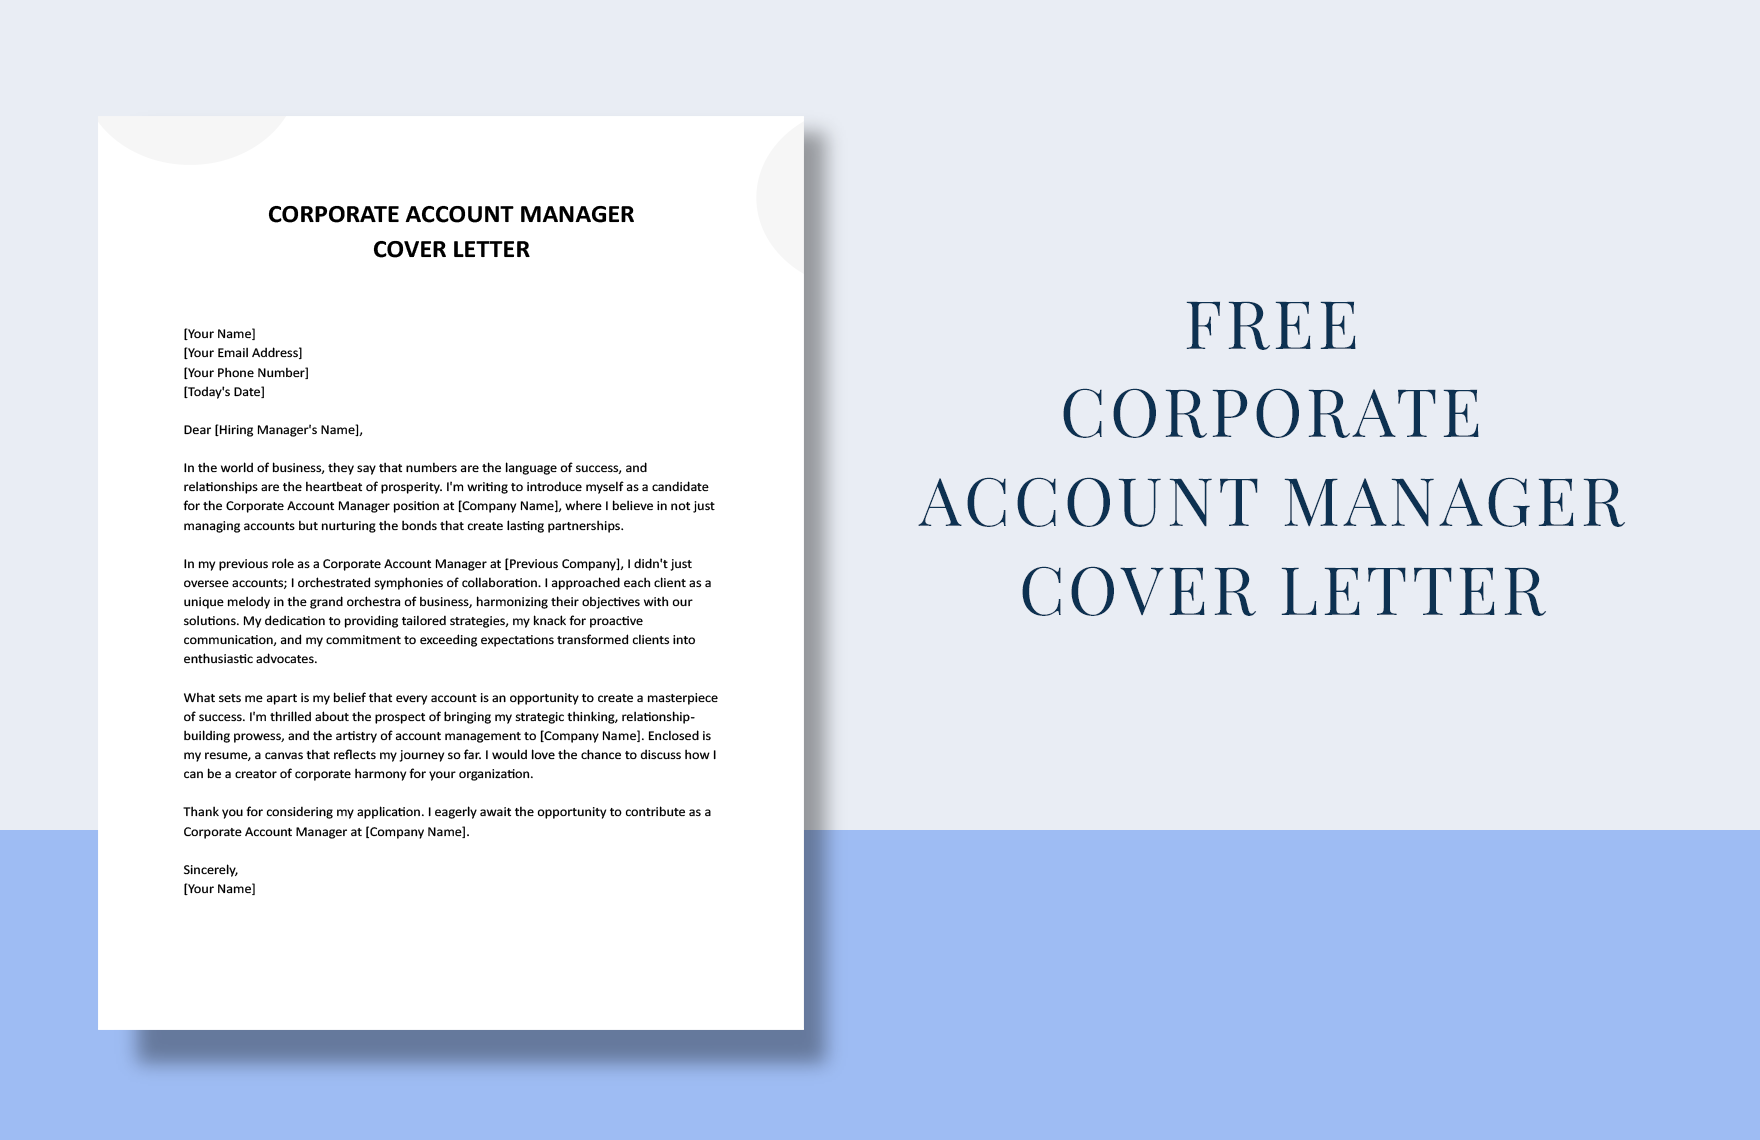 Corporate Account Manager Cover Letter